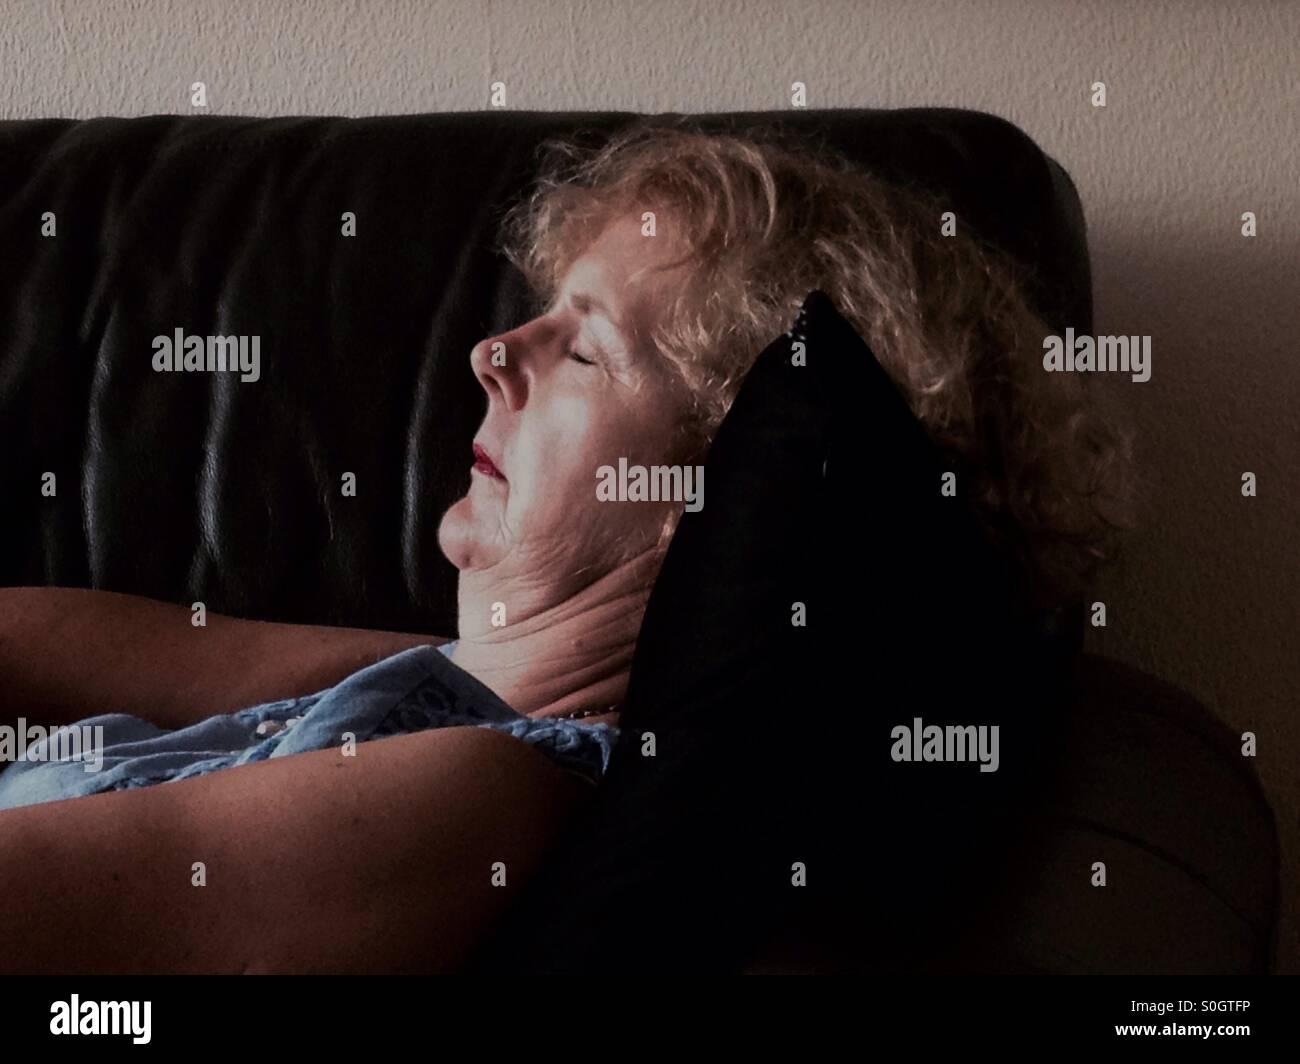 Mature woman sleeping on couch Stock Photo